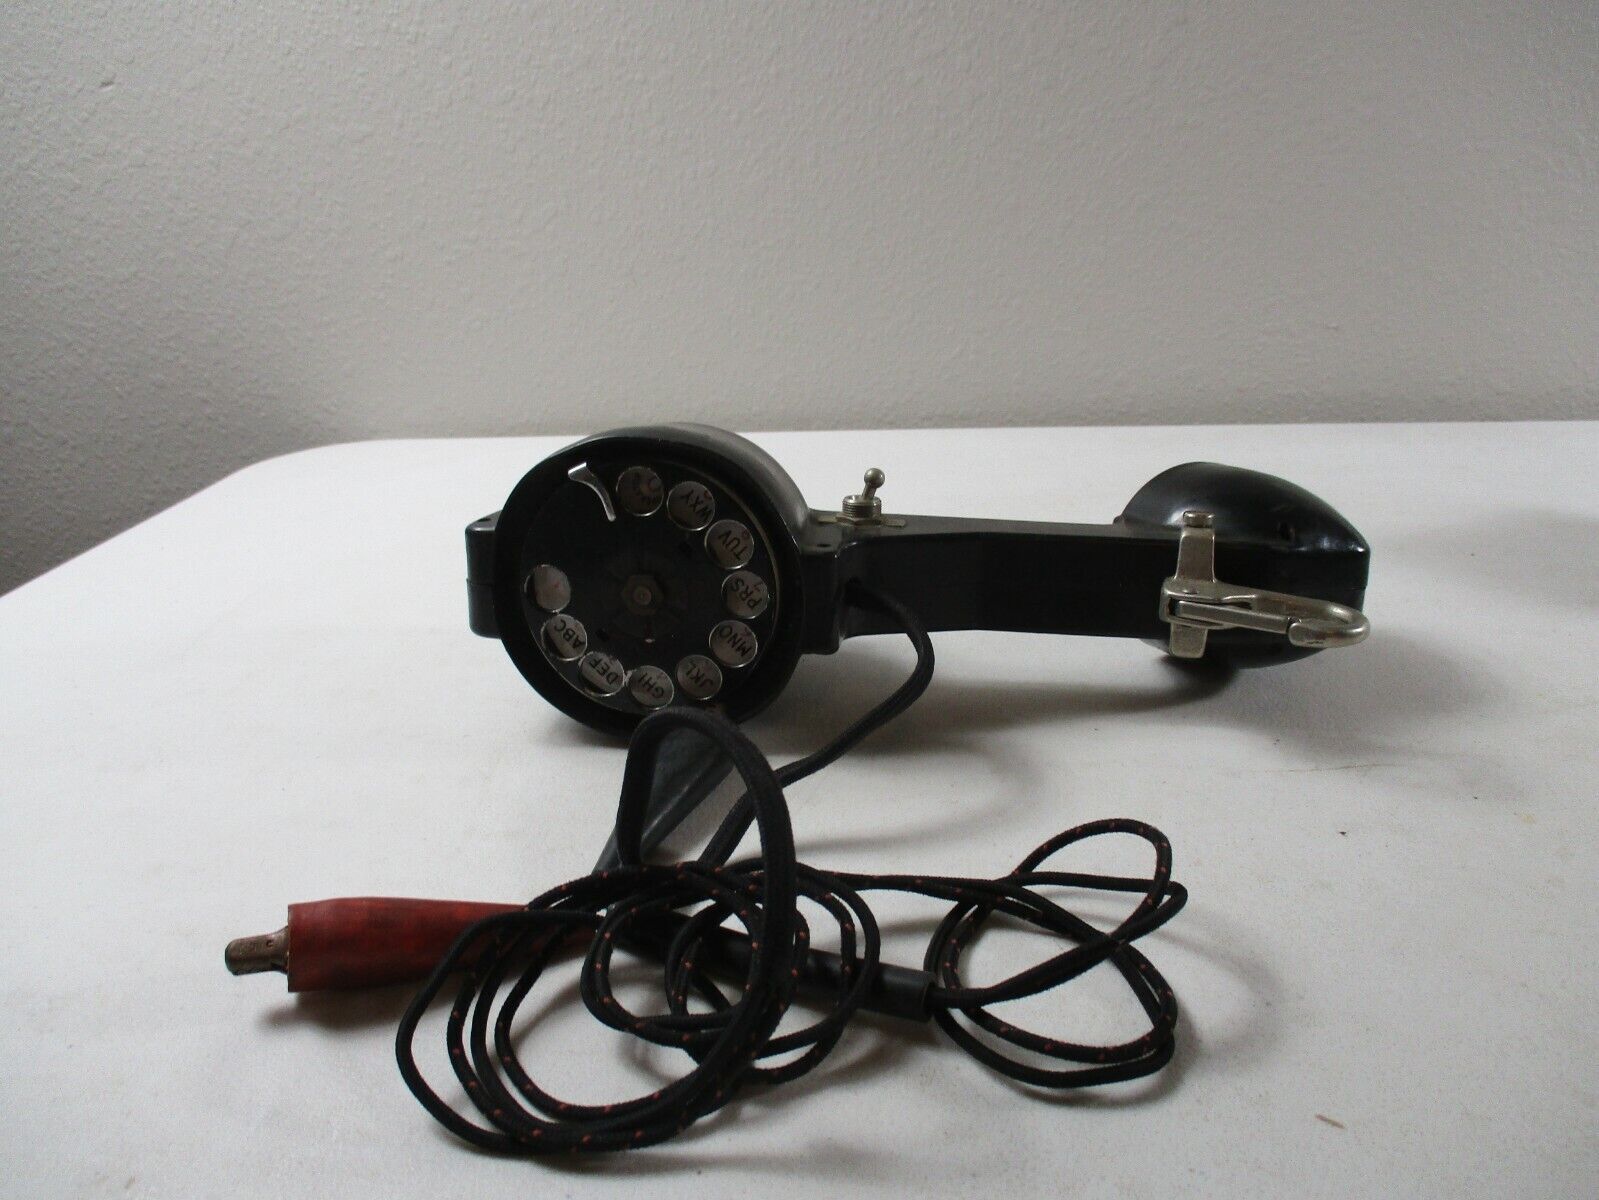 VINTAGE BECO LINEMAN’S ROTARY TELEPHONE TESTER WORKING